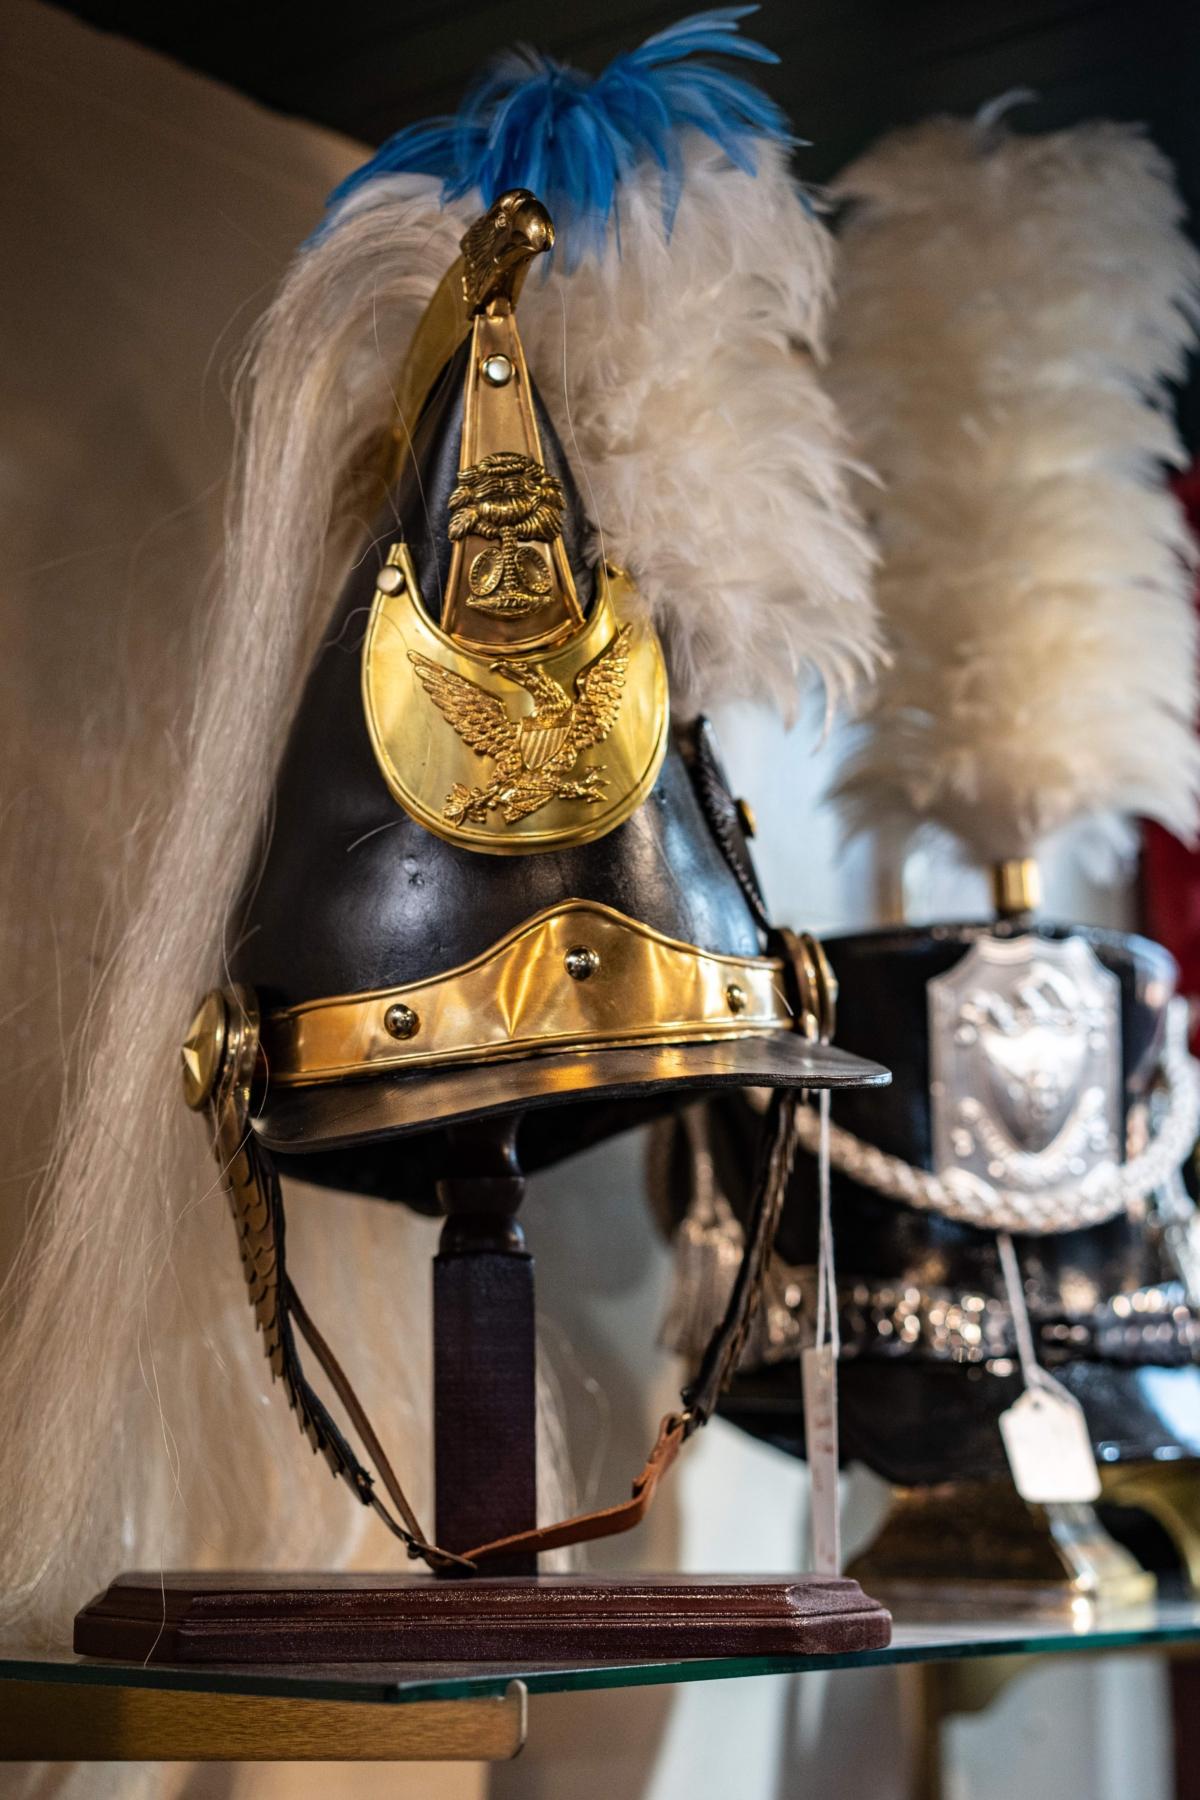 Bill Wickham’s reproduction of a dragoon shako hat that would have been worn by Charleston, S.C., mounted militia, circa 1833. (Samira Bouaou/The Epoch Times)